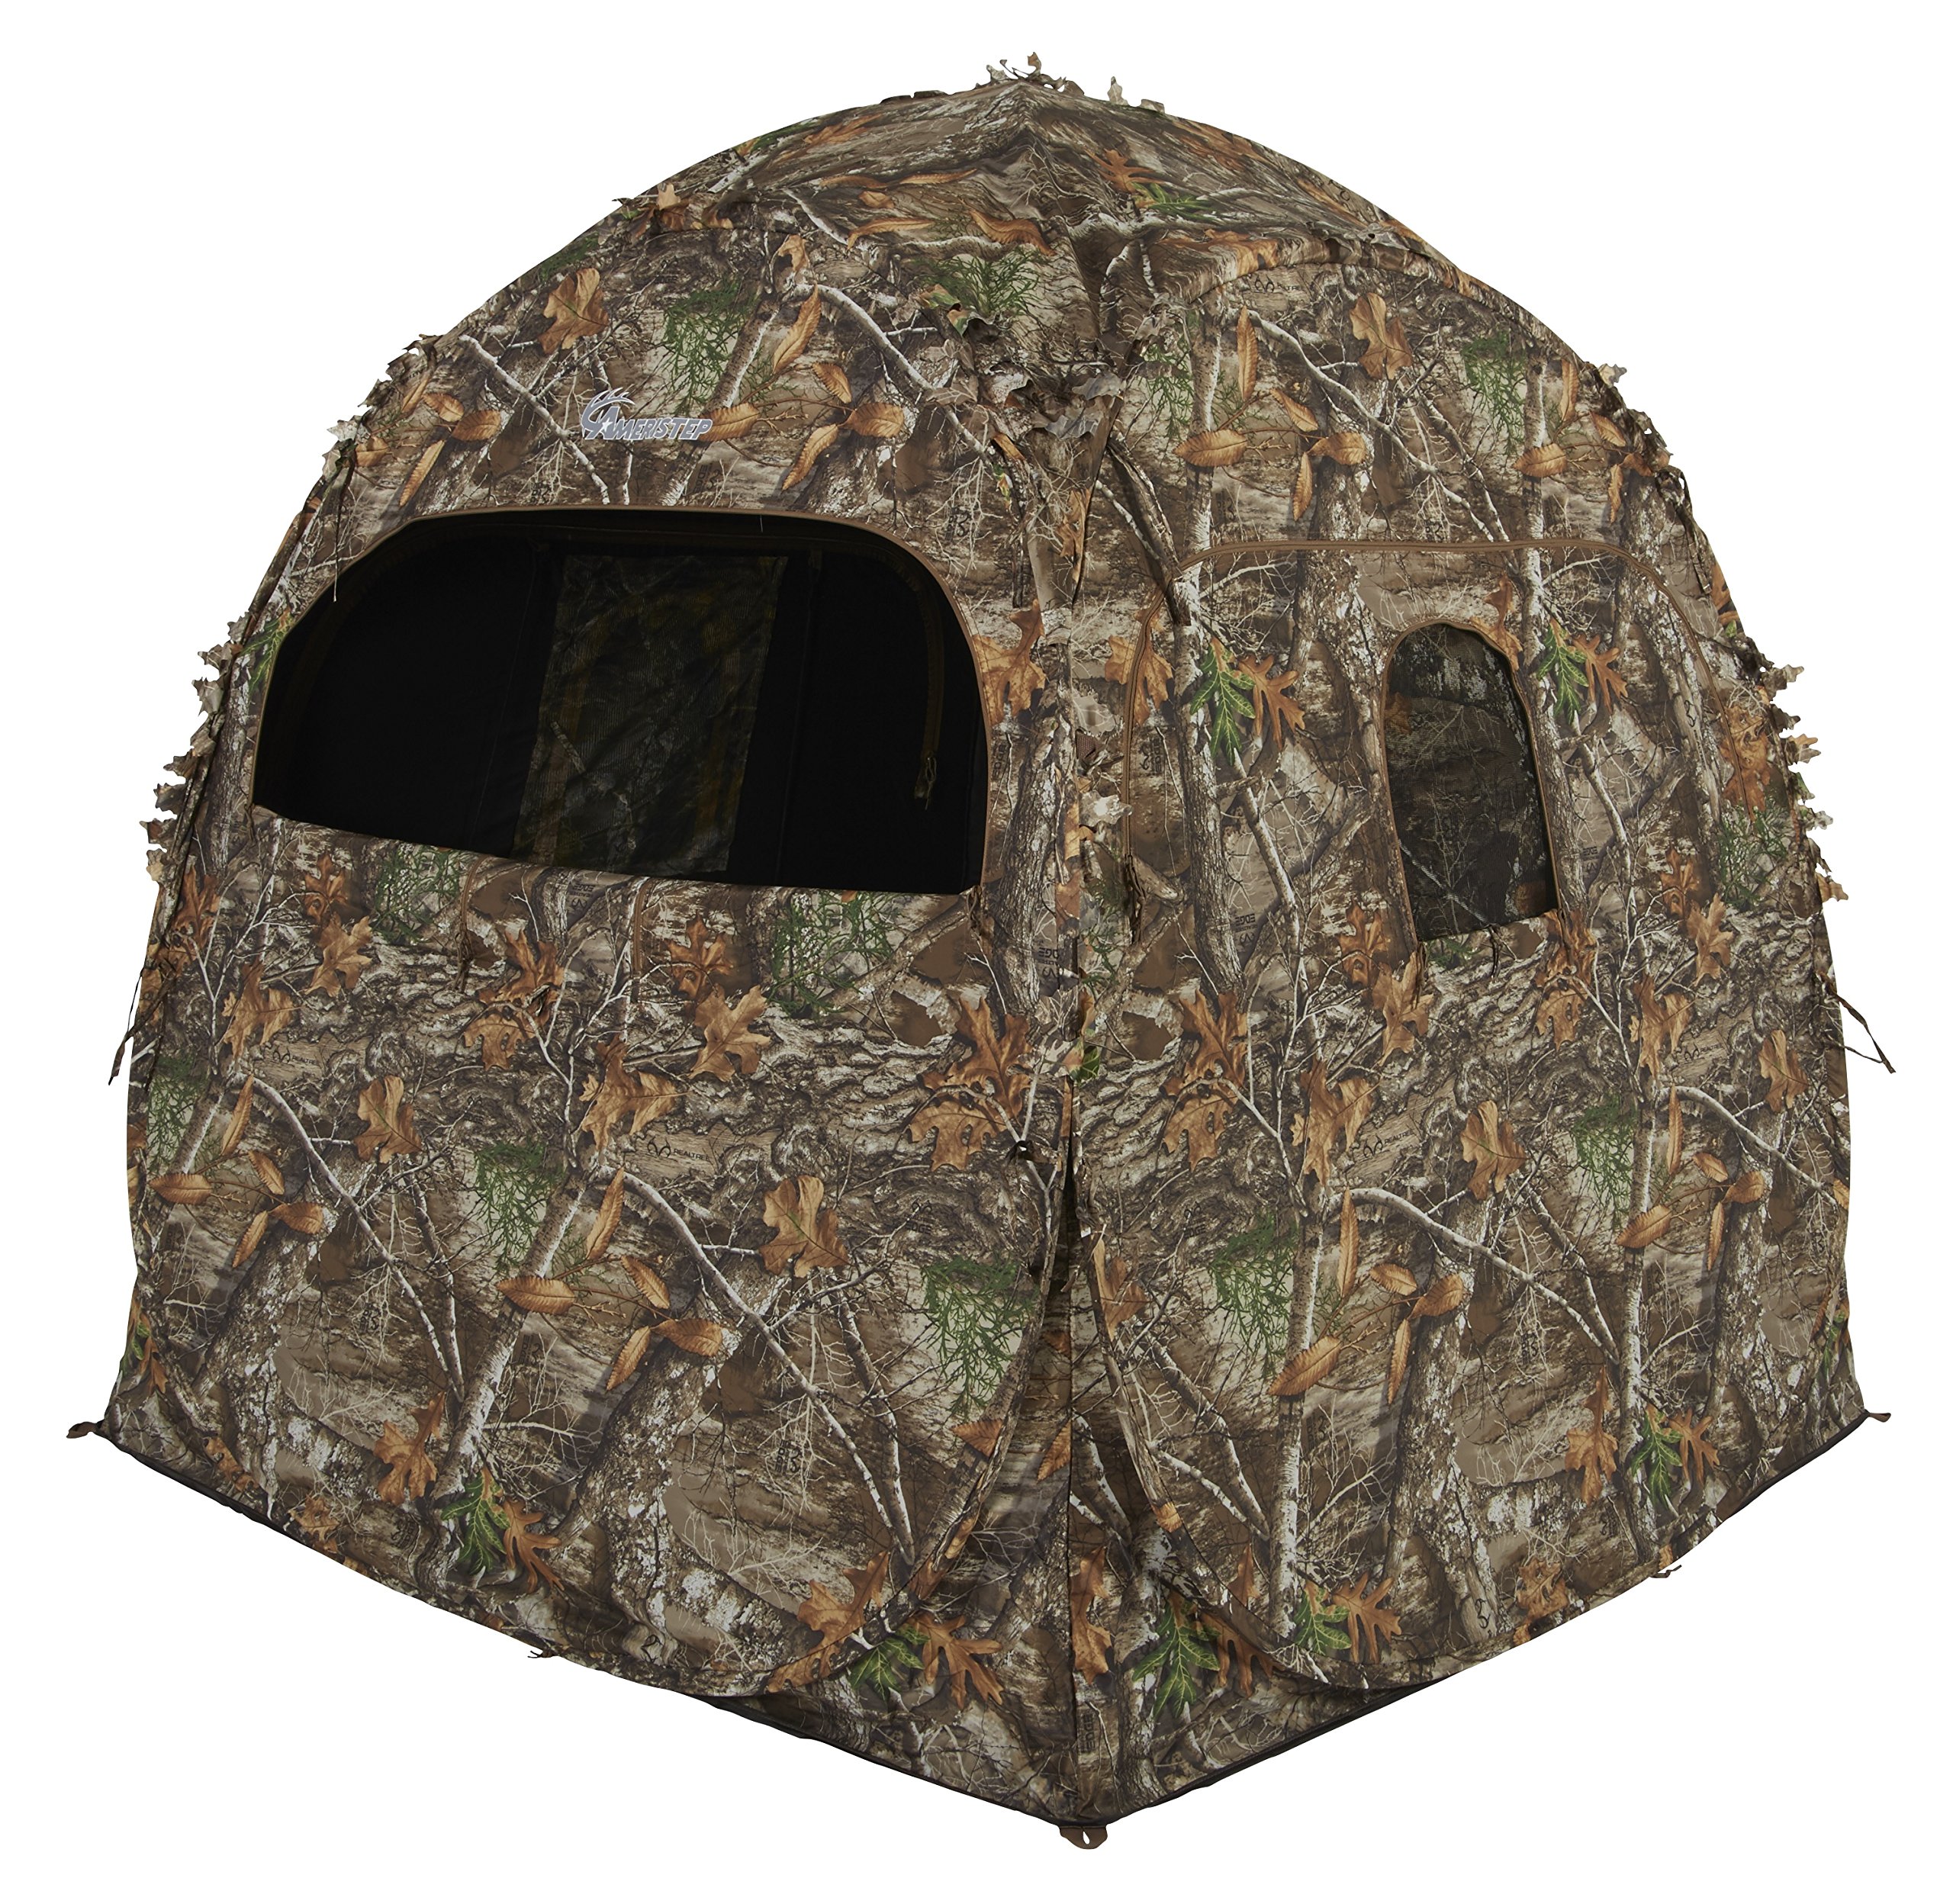 Ameristep Doghouse ground Blind, Two Man Hunting Blind in Realtree Edge camo